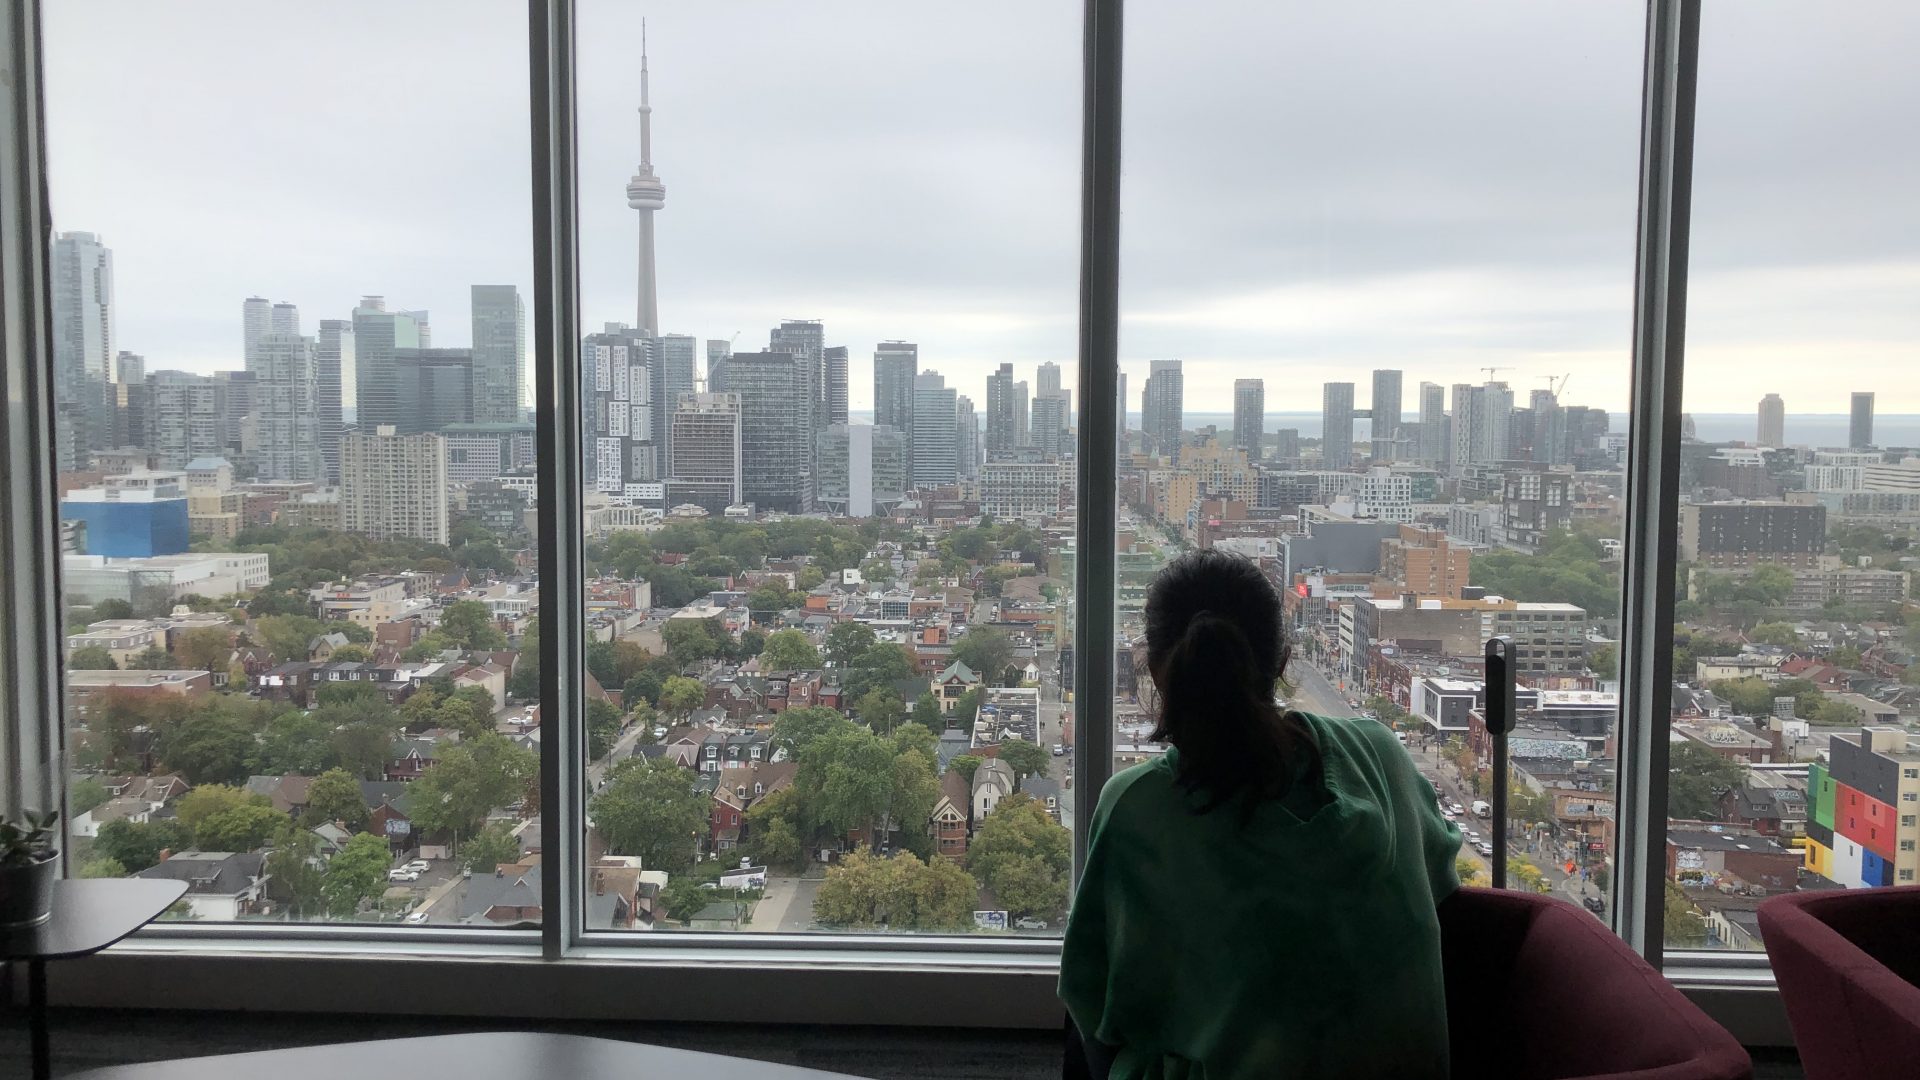 A girl sits by the window of a high-rise building and you can see the skyline in the background.